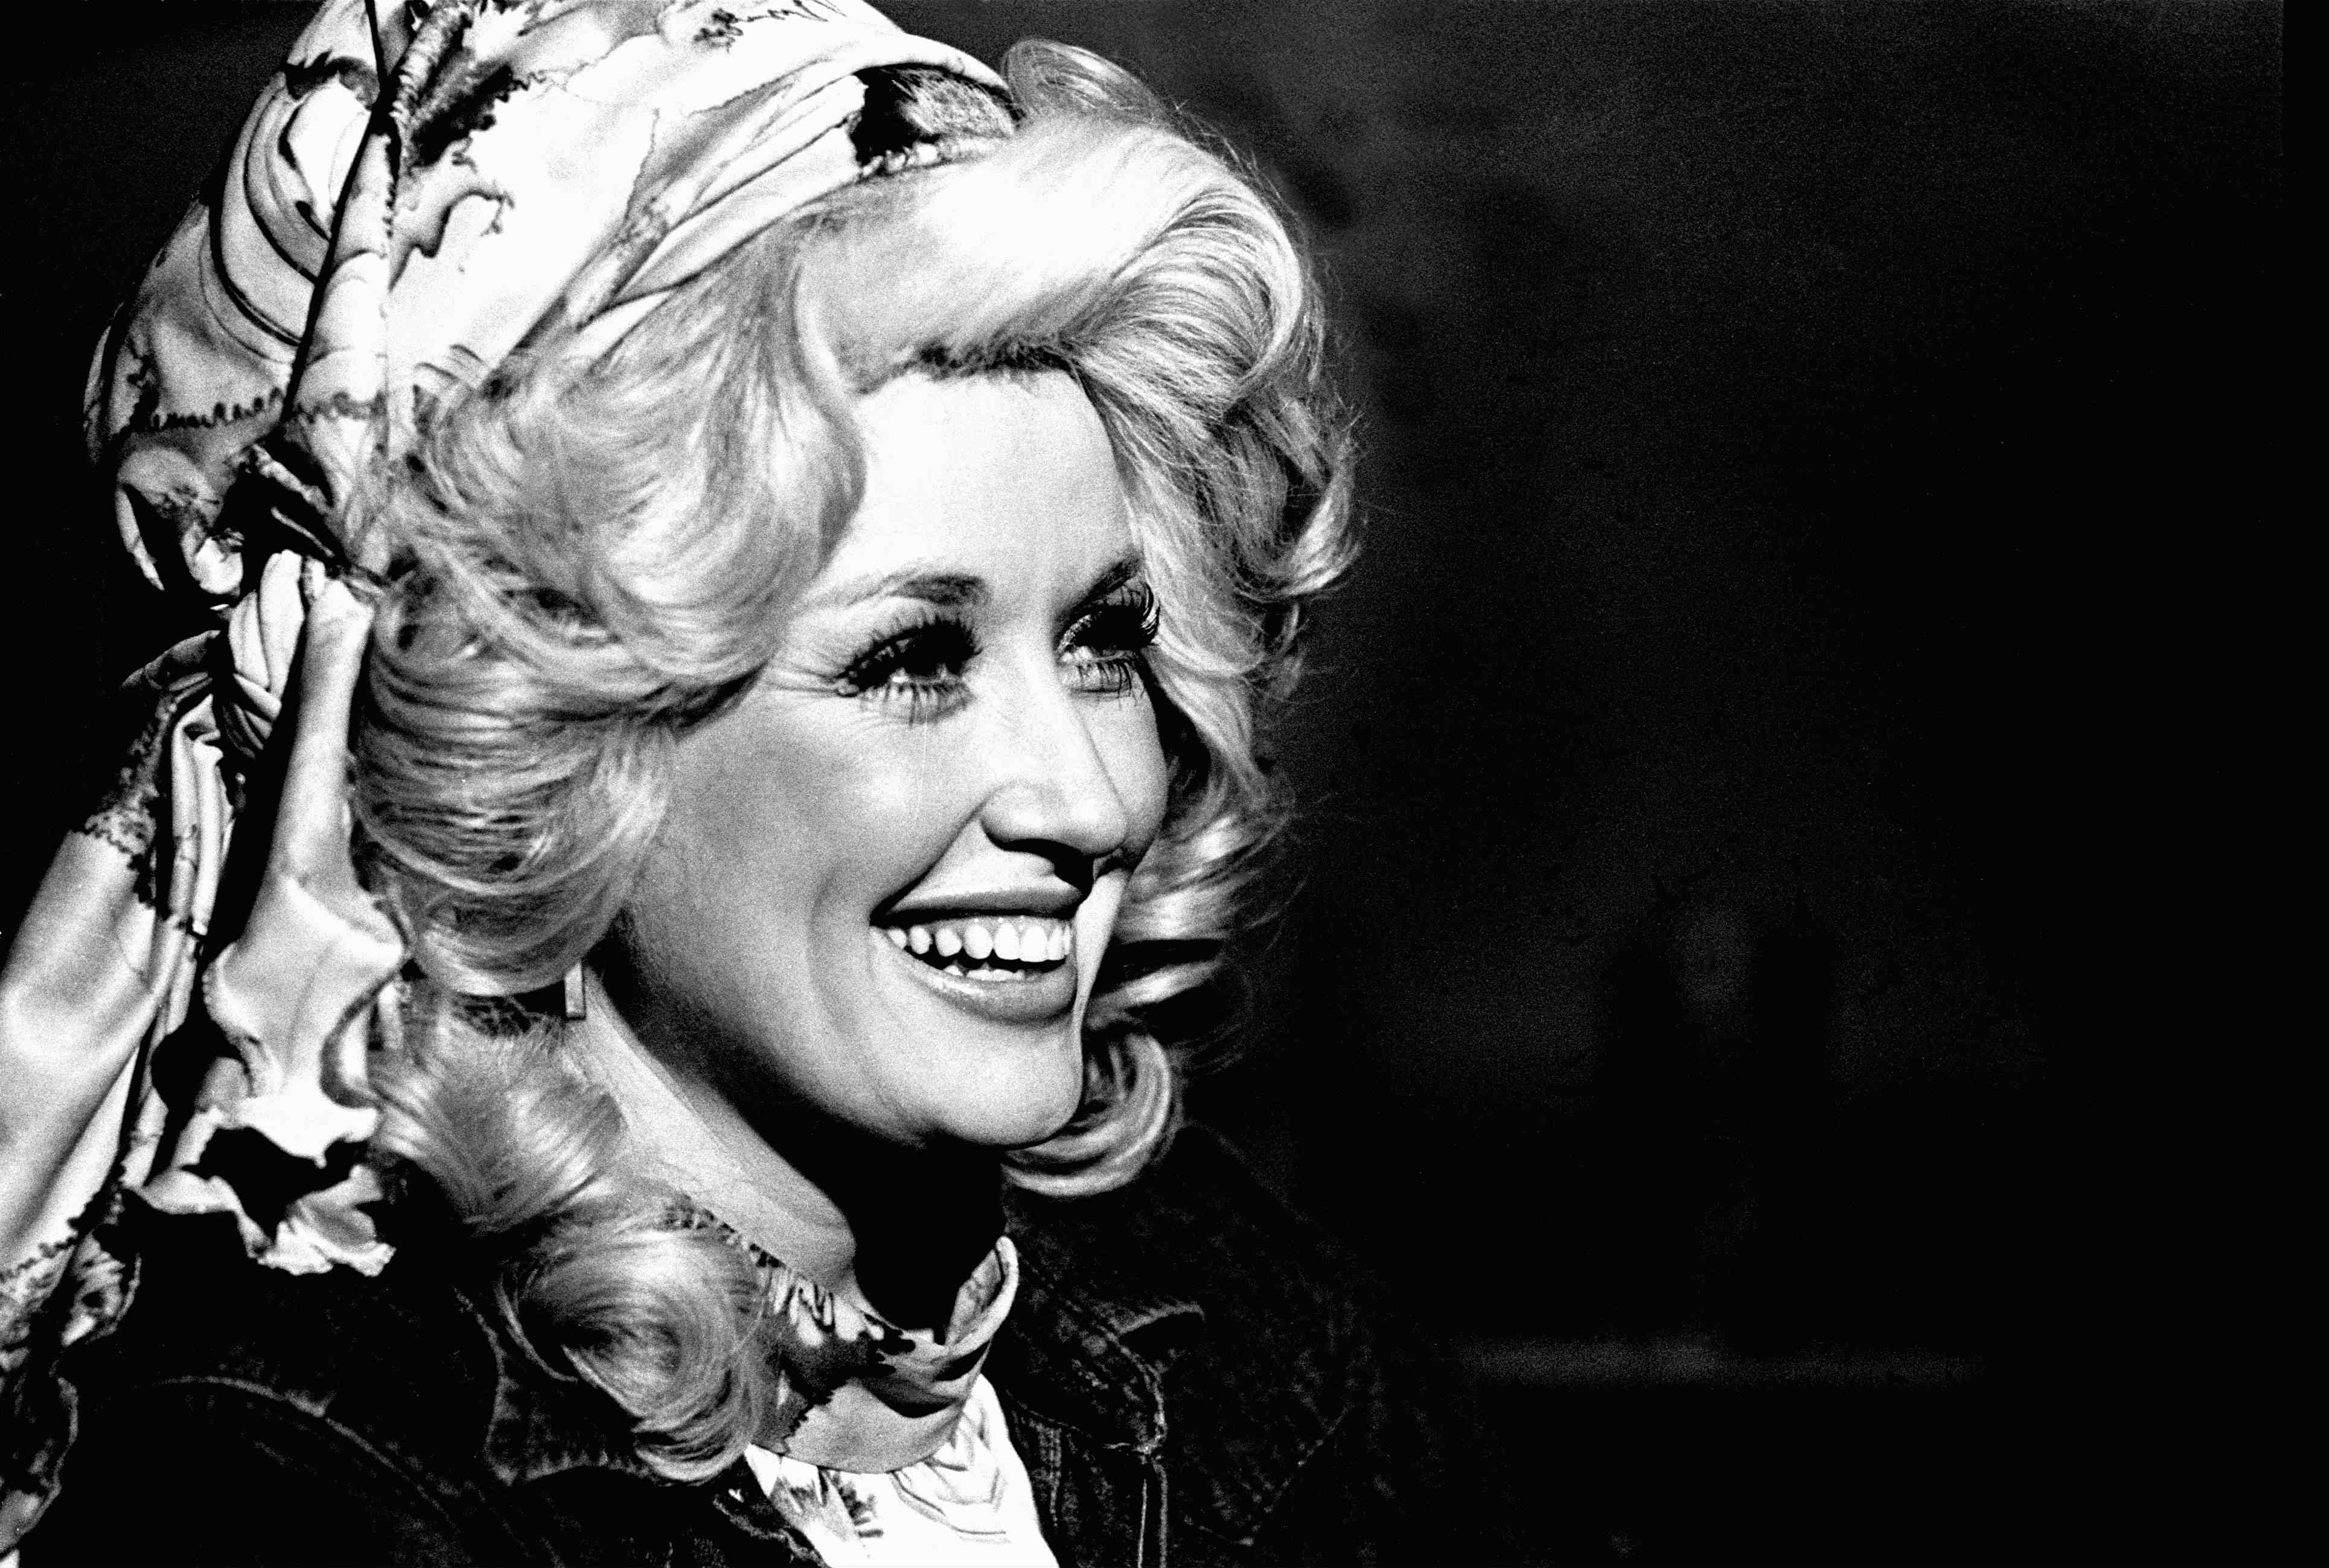 A close-up of Dolly Parton smiling her famous smile in black and white. Her hair is big and curly in a beehive with a scarf fastened around her head. The photo was taken in 1978.